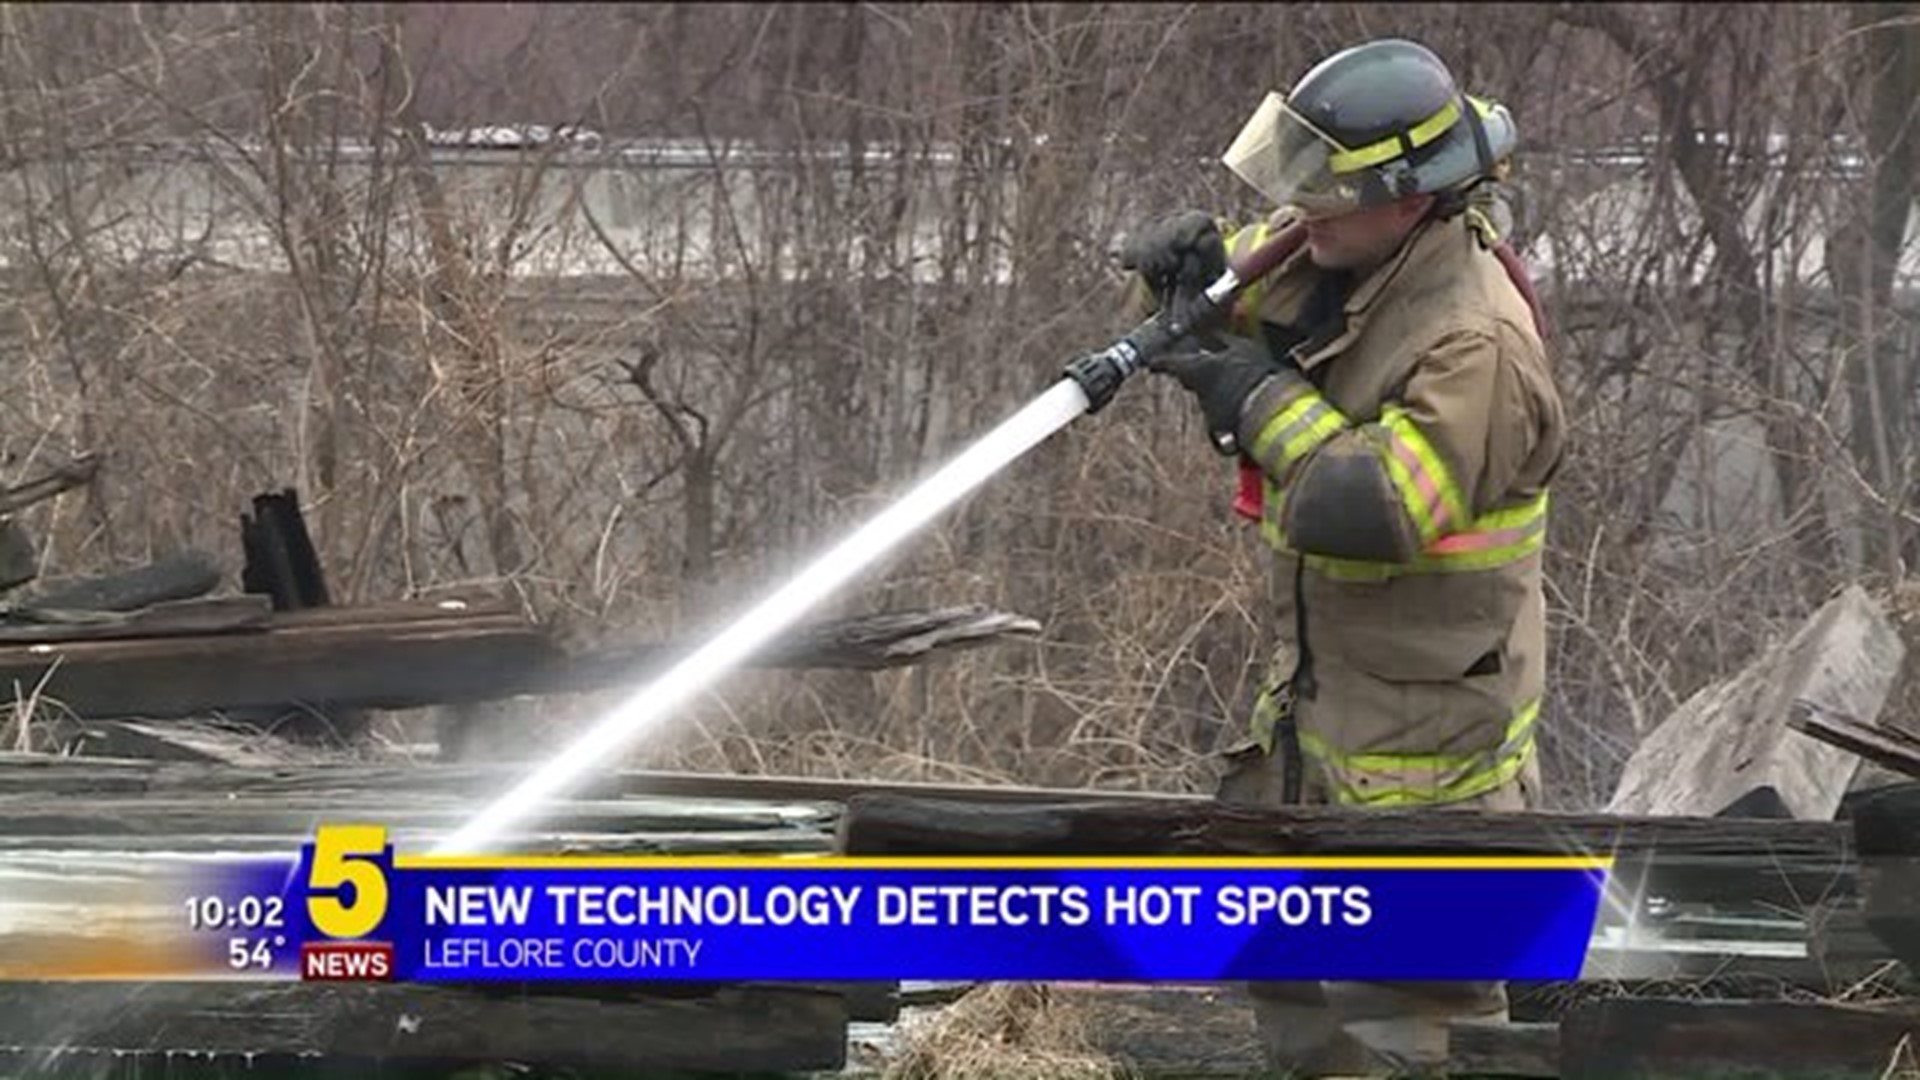 New Technology Detects Hot Spots